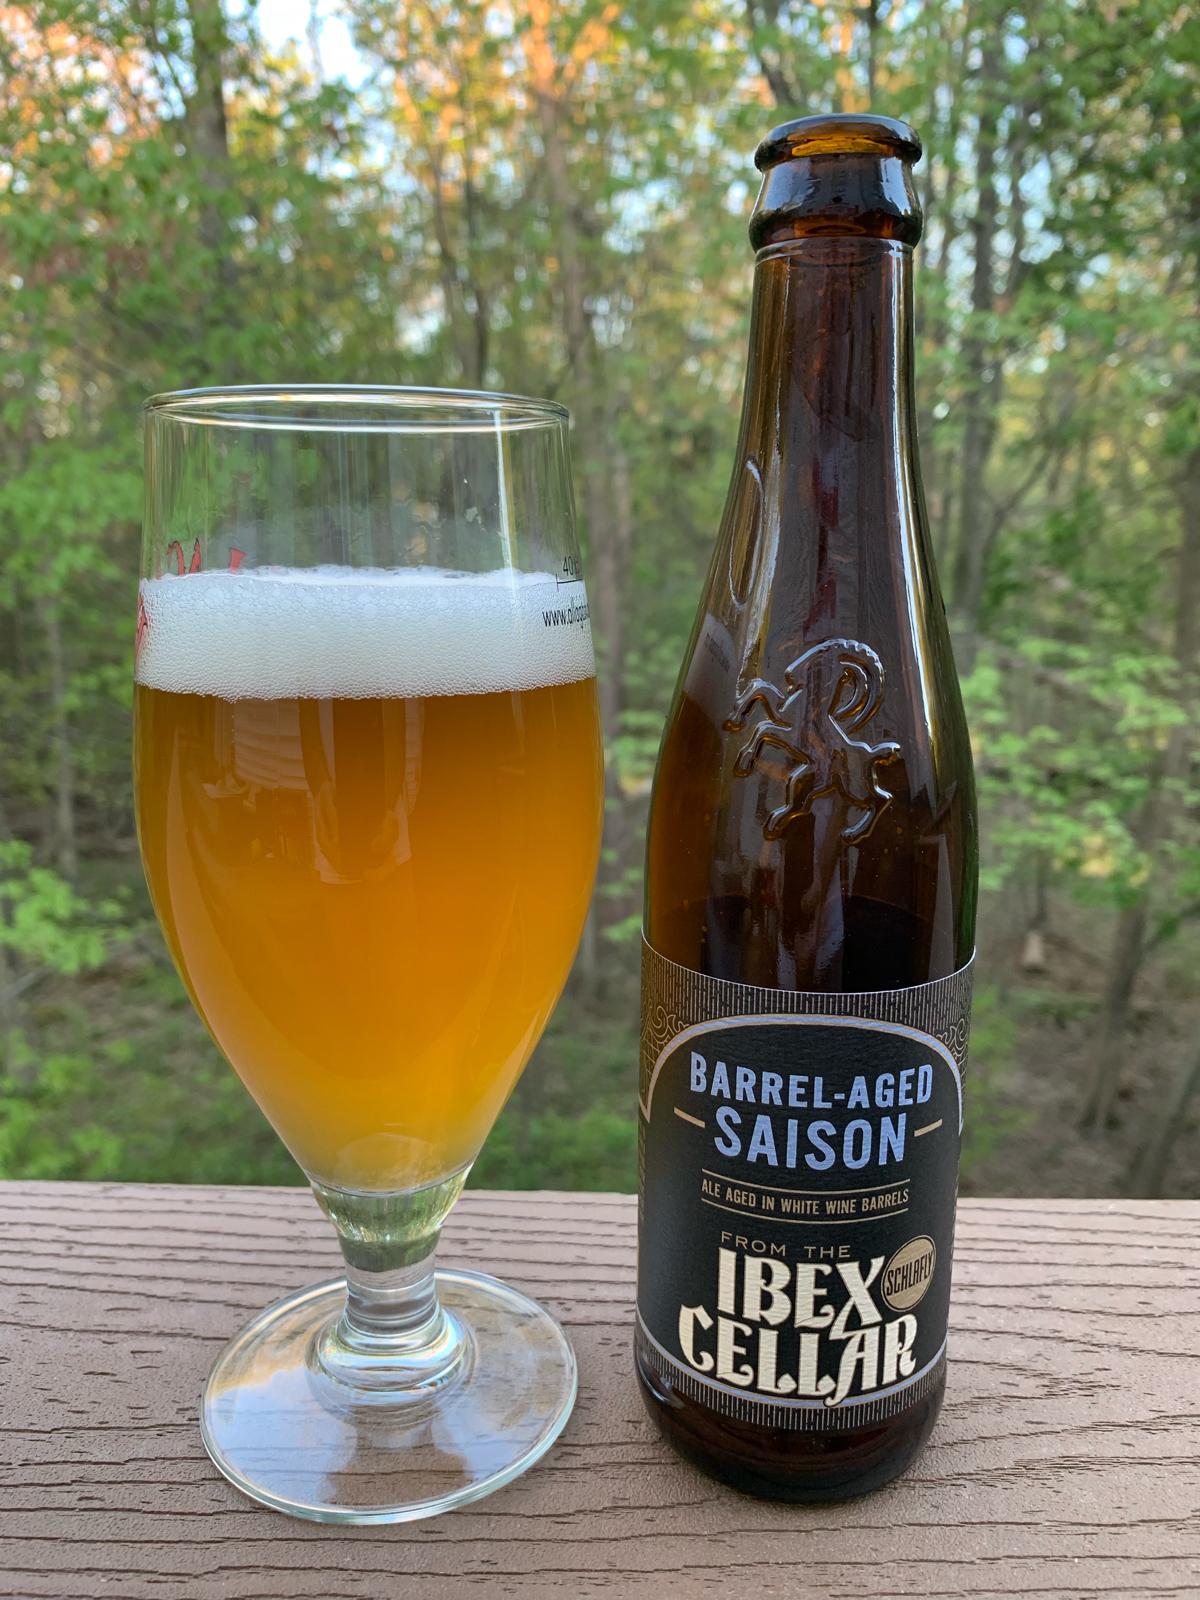 From the Ibex Cellar: Barrel Aged Saison